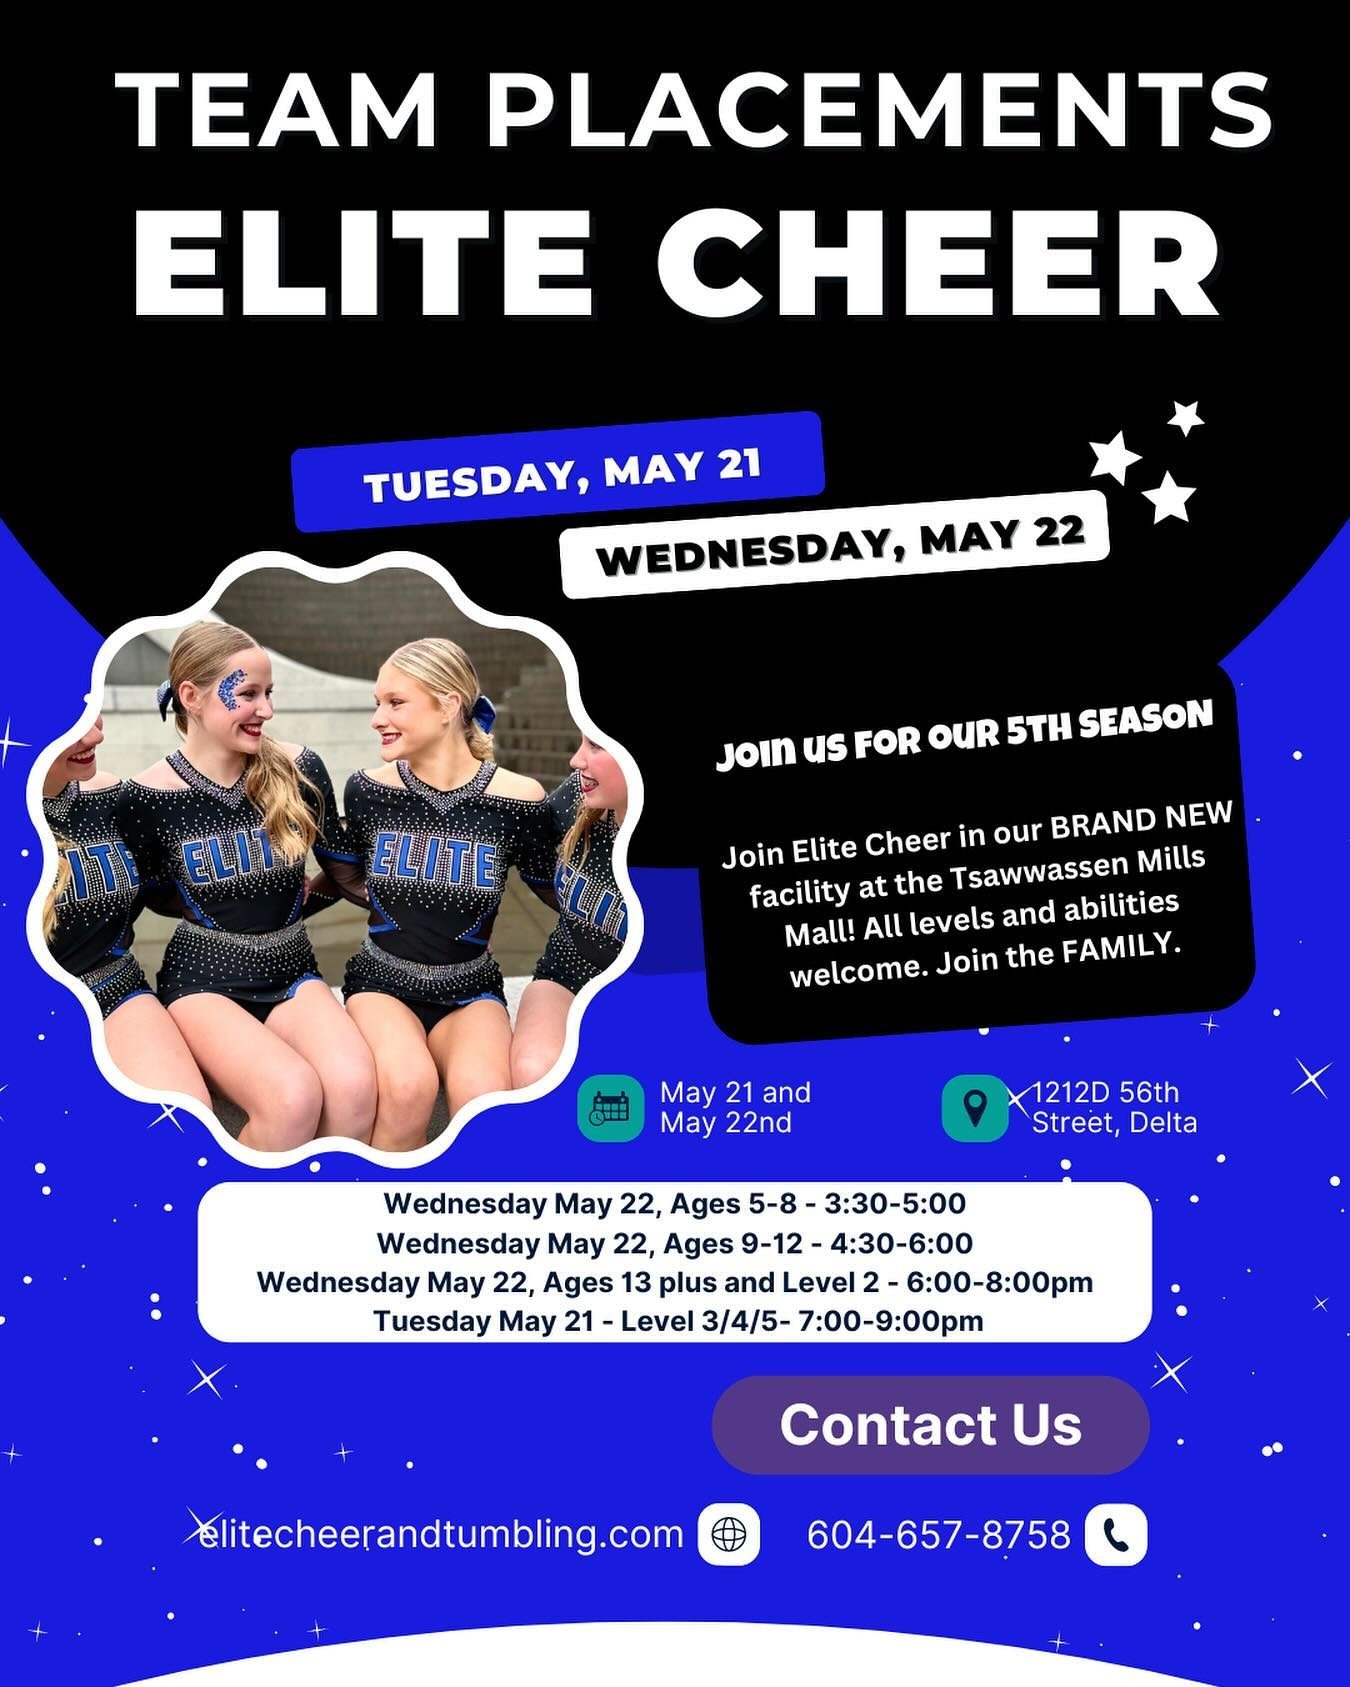 Interested in joining an Elite Team?! Join us for team placements.